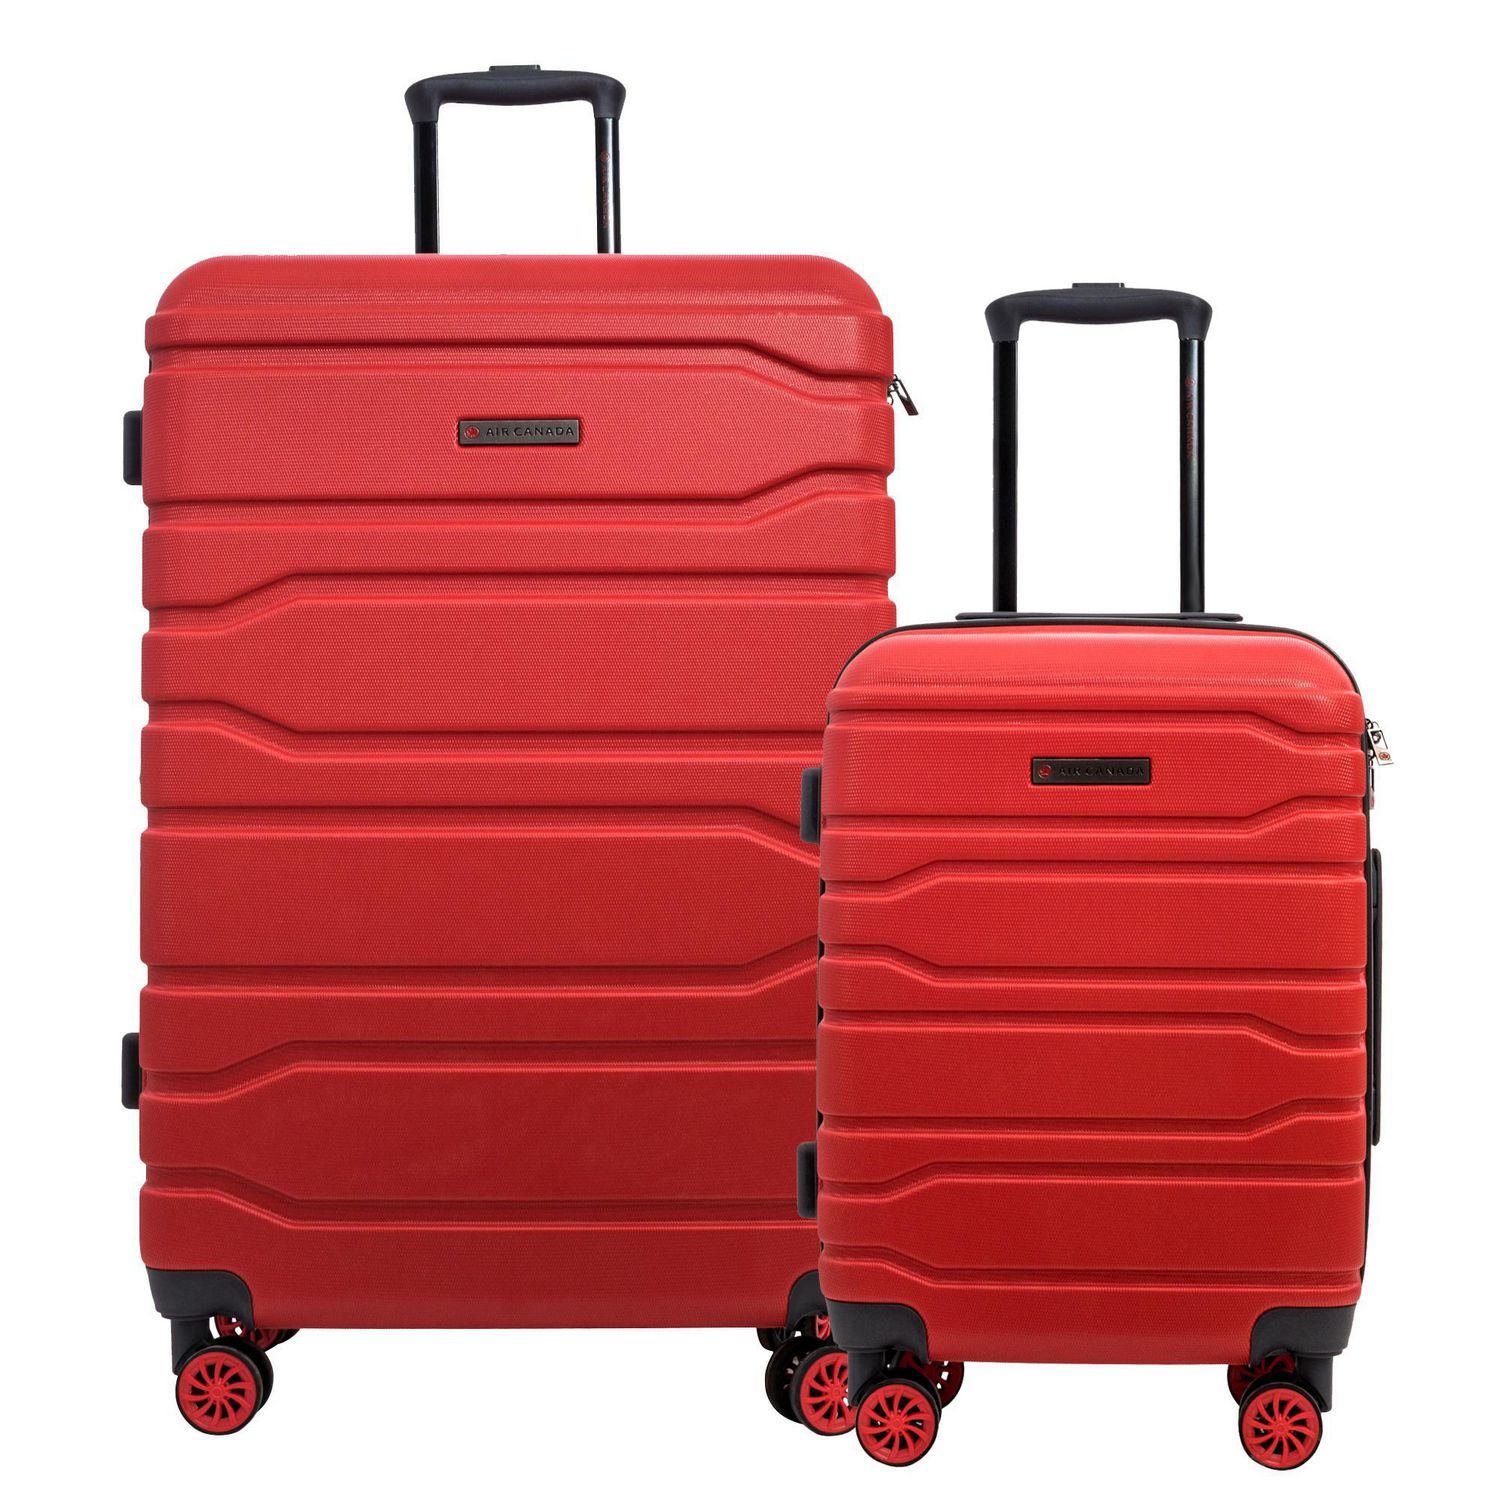 Air Canada Radius Collection 2-Piece Luggage Set, Made of durable ABS -  Walmart.ca